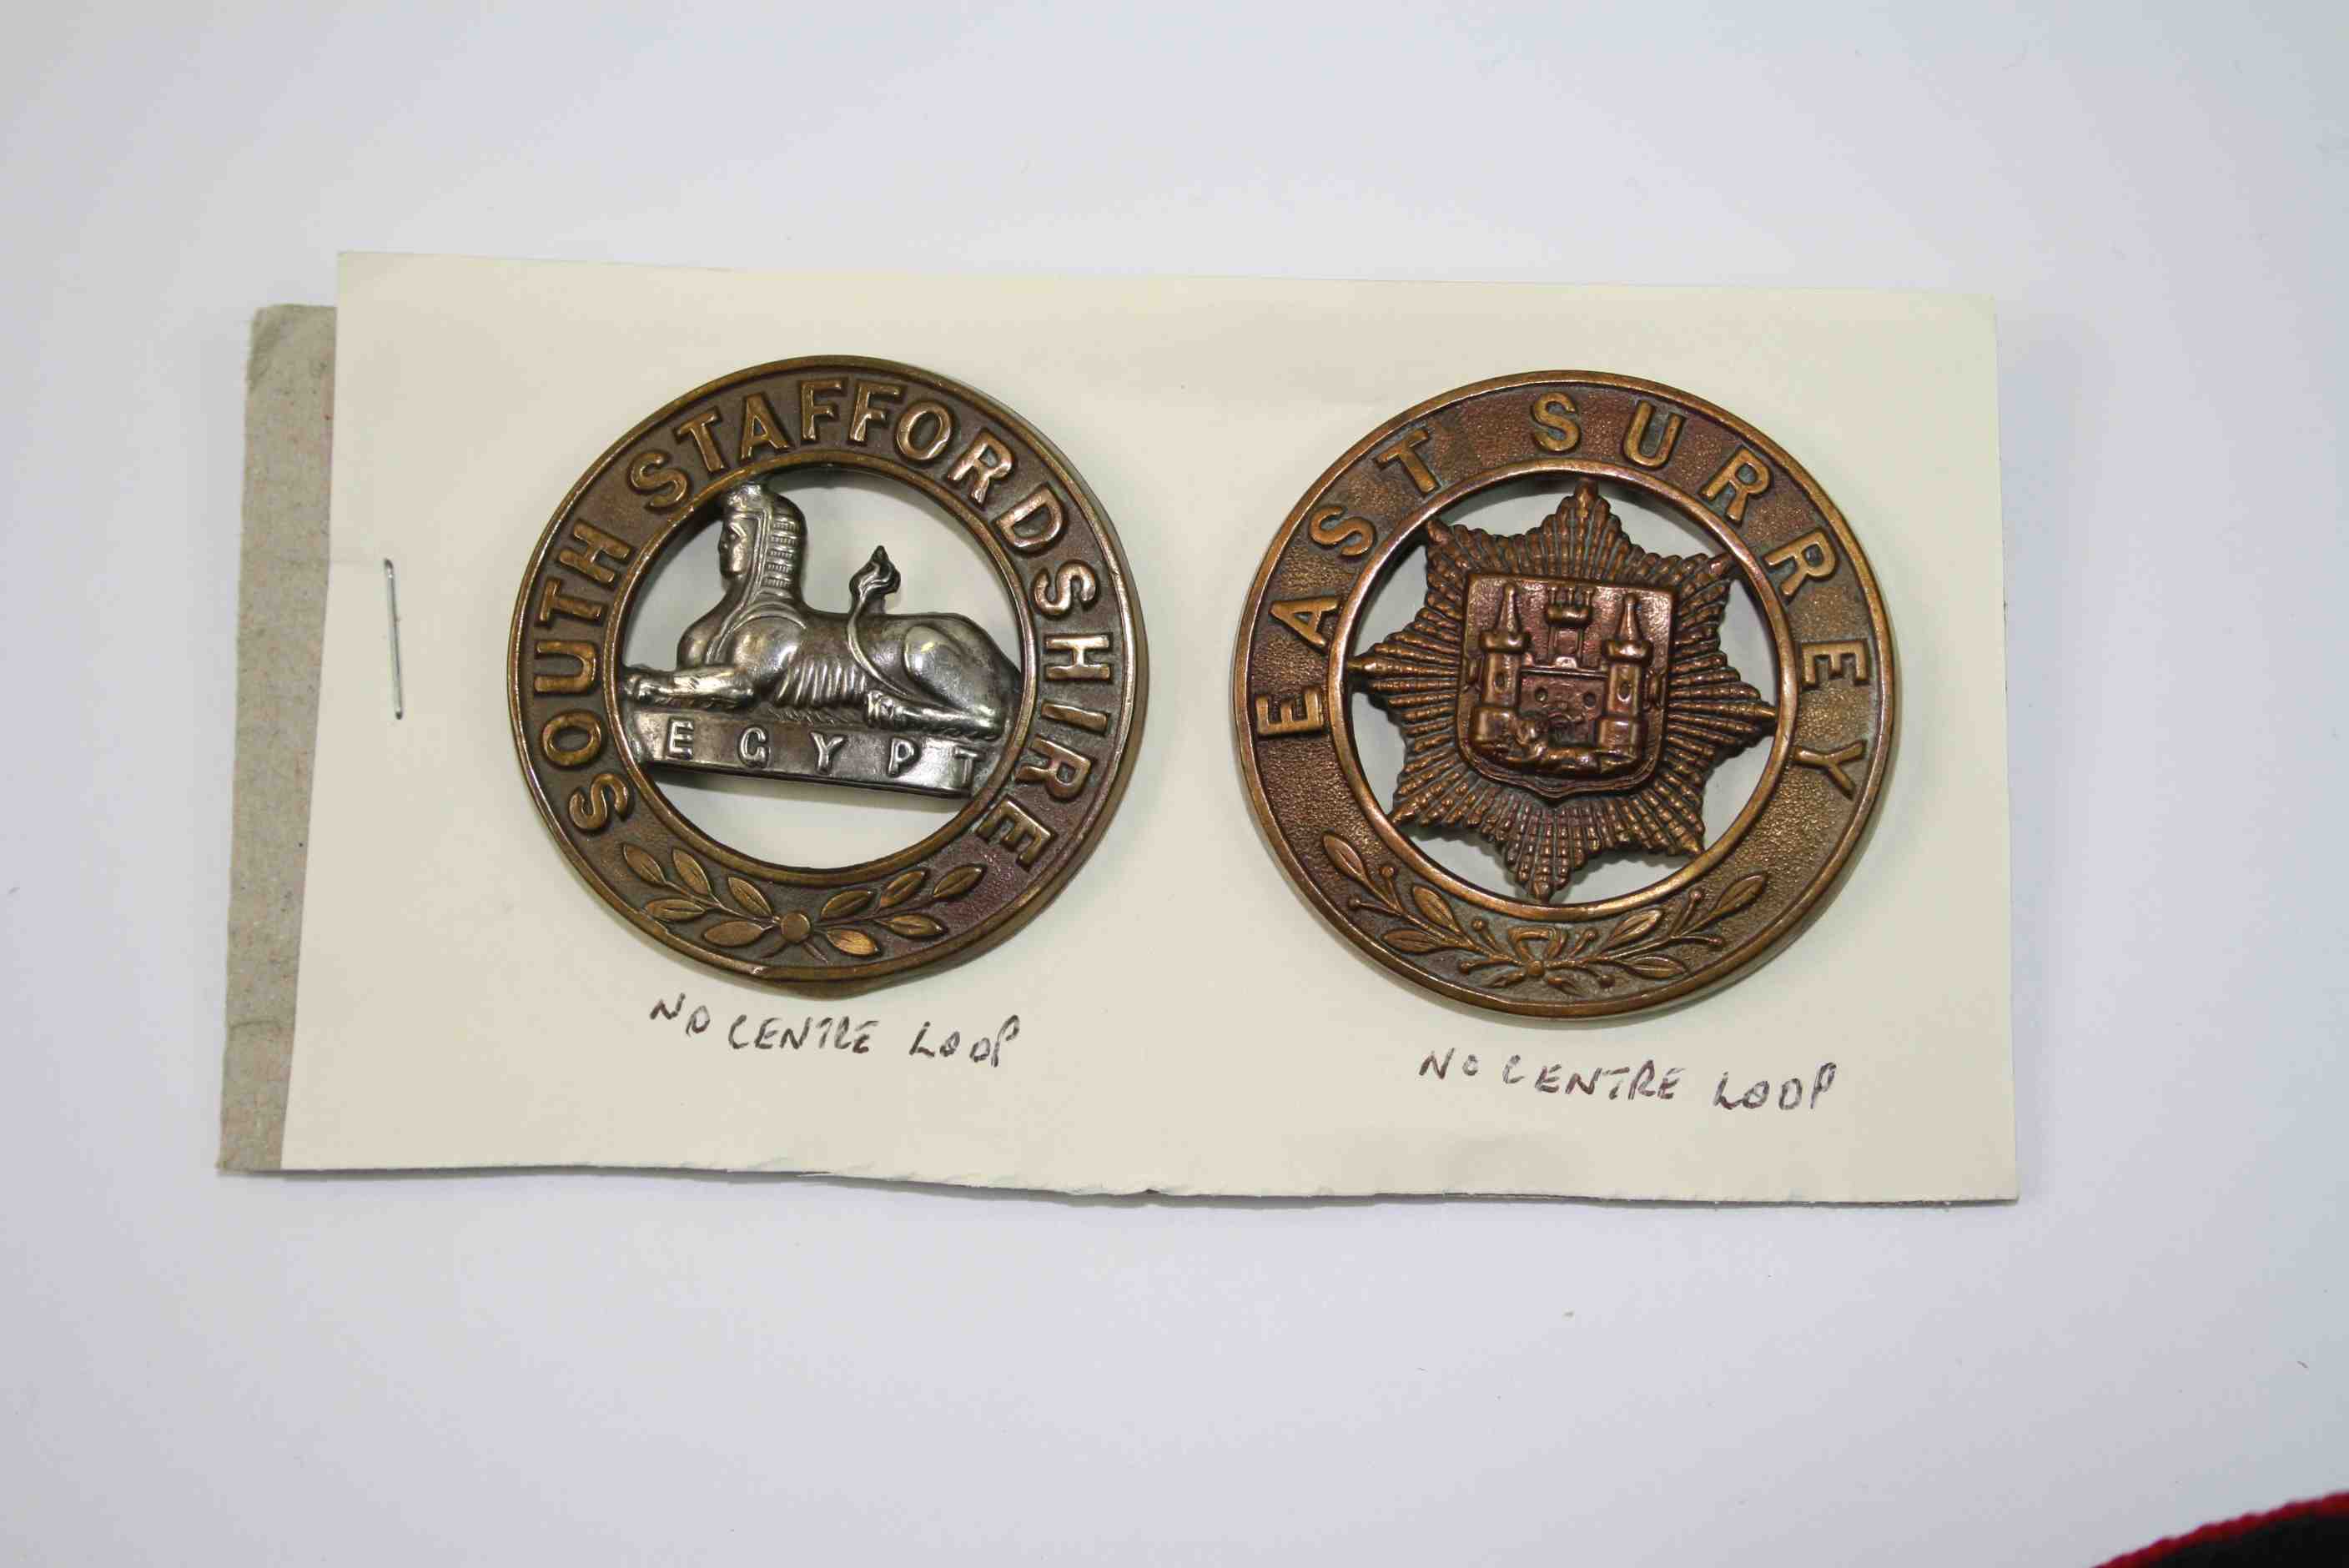 Two Brass Helmet Plate Badges For The South Staffordshire And The East Surrey Regiments.